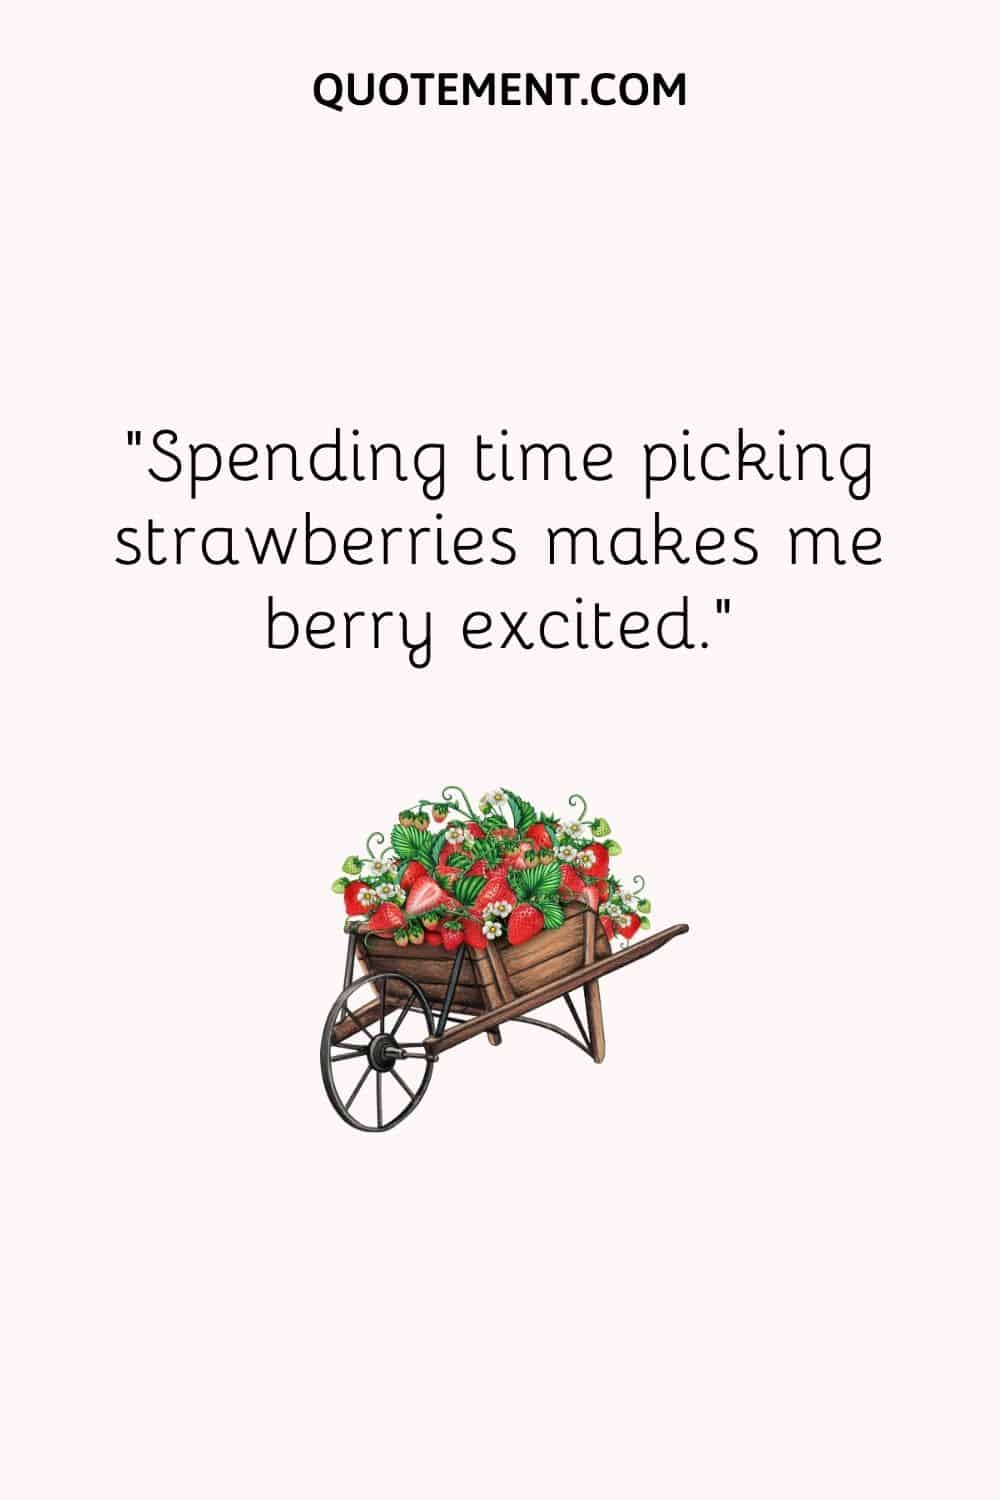 Spending time picking strawberries makes me berry excited.